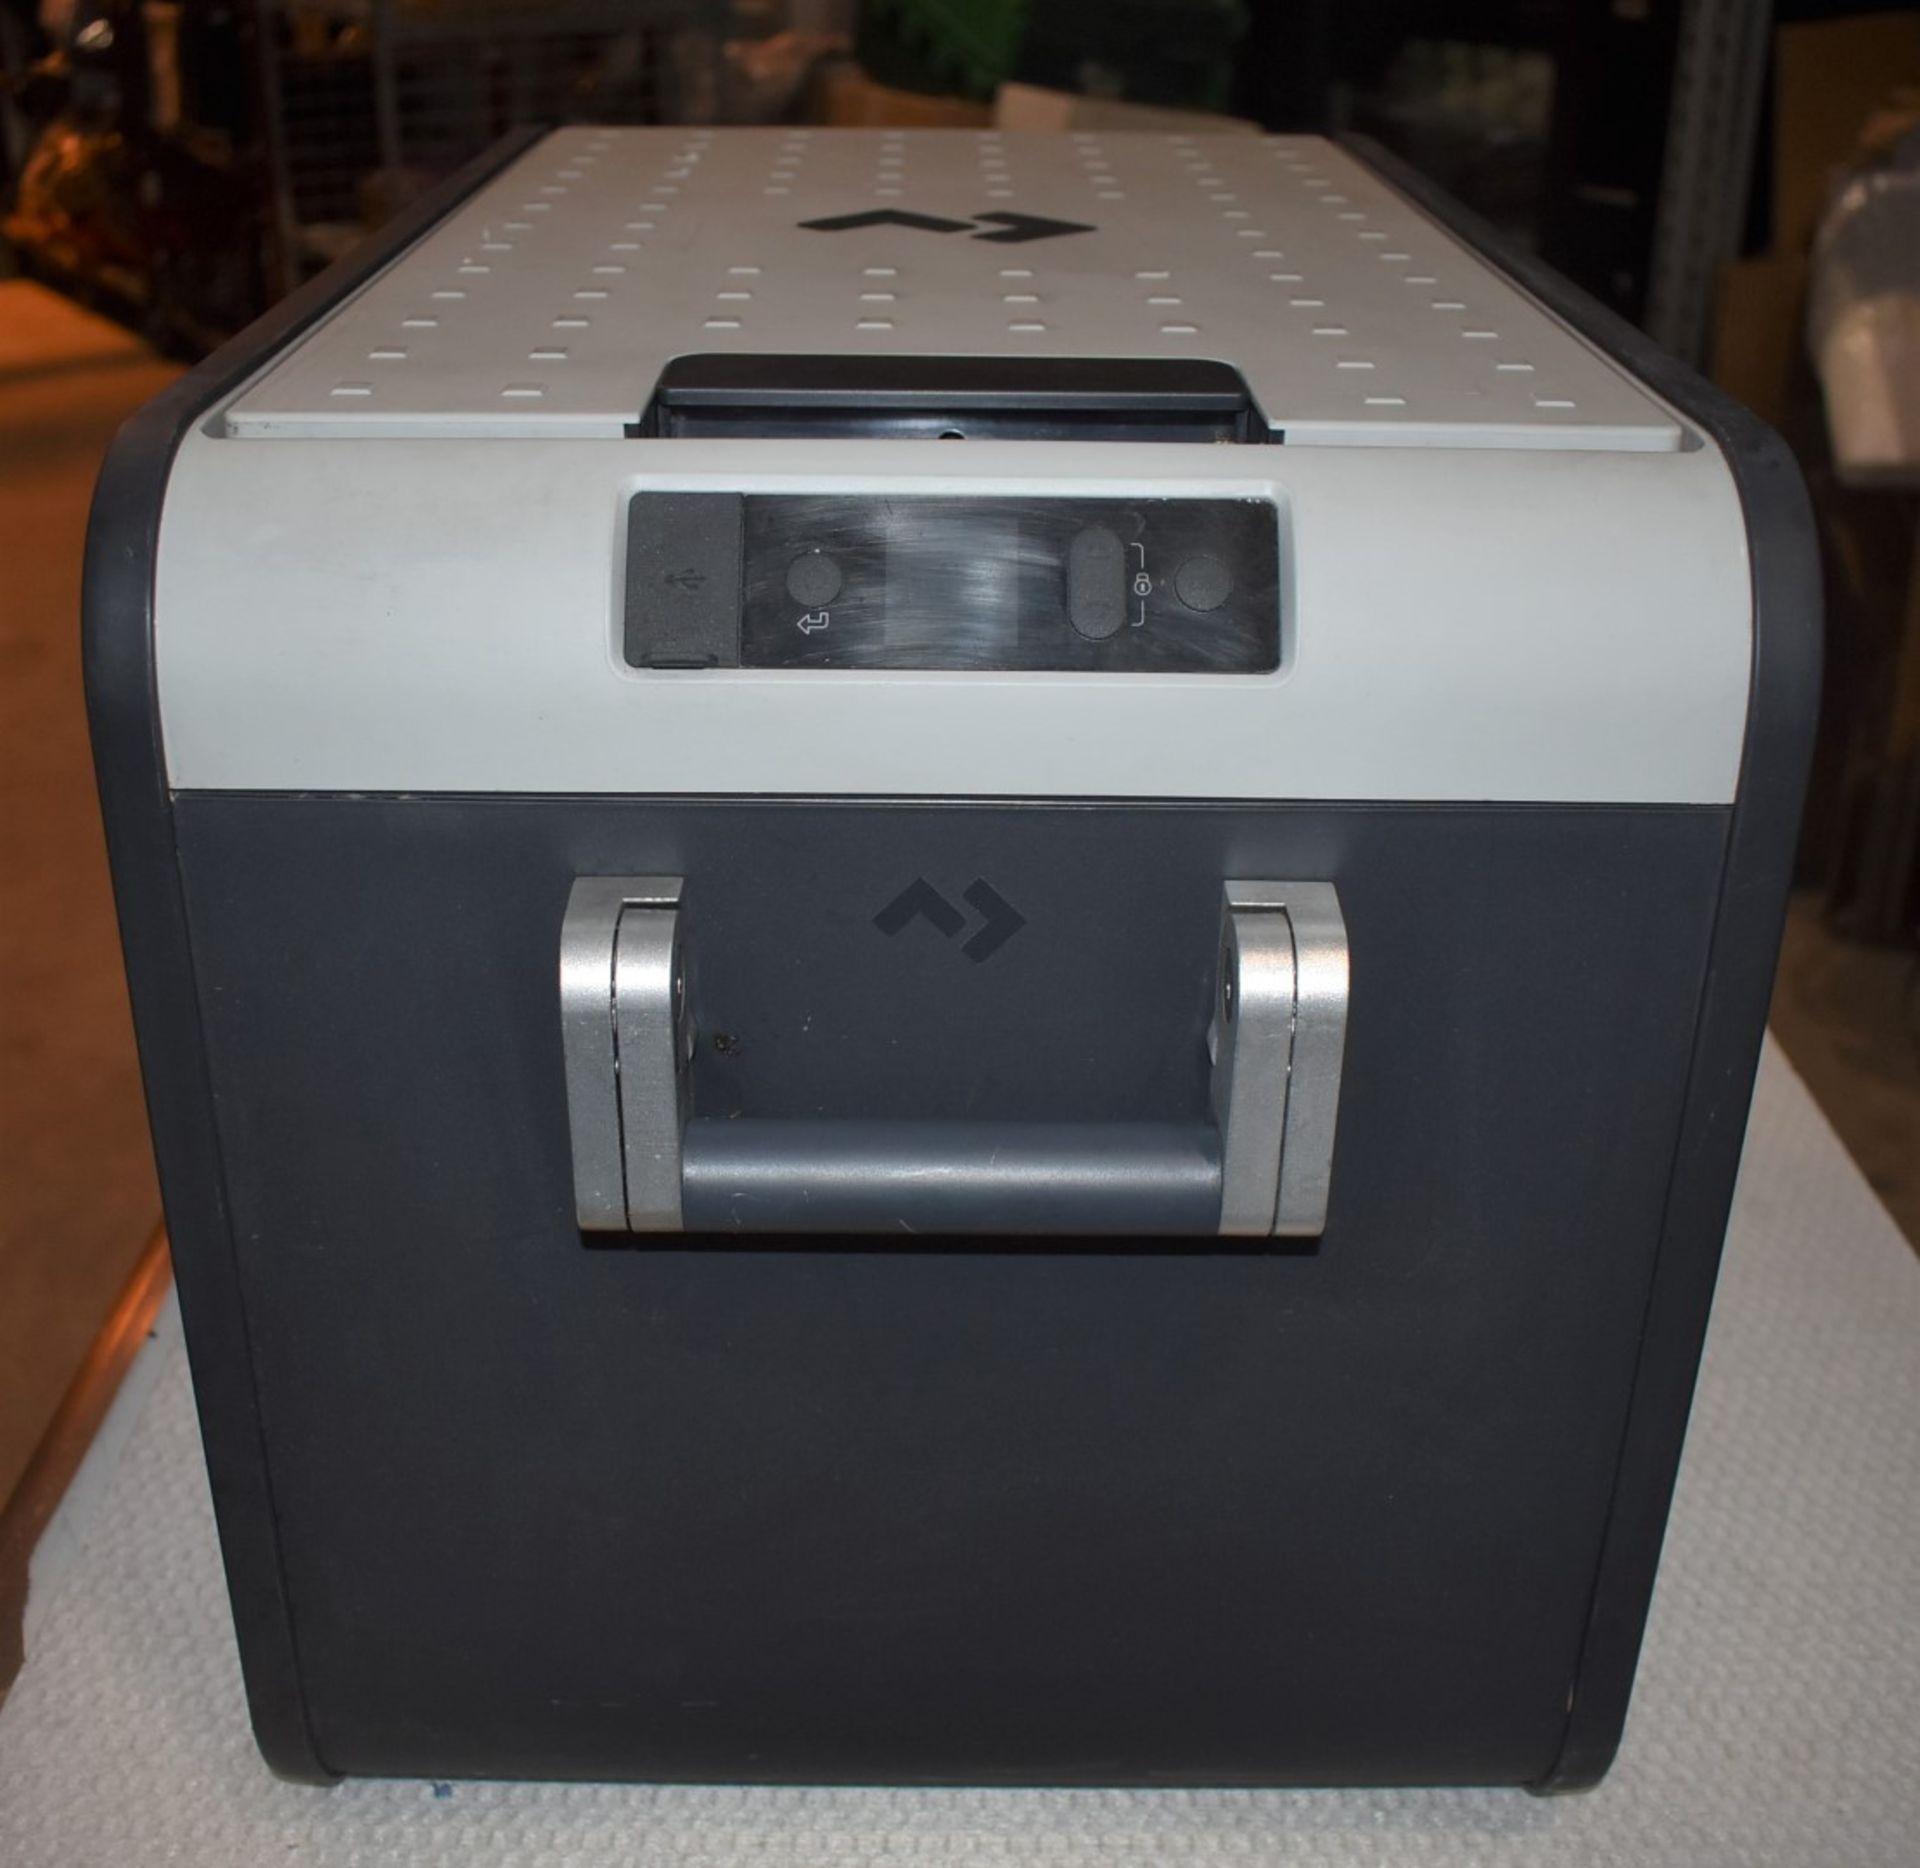 1 x Dometic CFX3 35 Portable 32l Compressor Cooler and Freezer - Perfect For Cooling The BBQ Beers - - Image 2 of 9